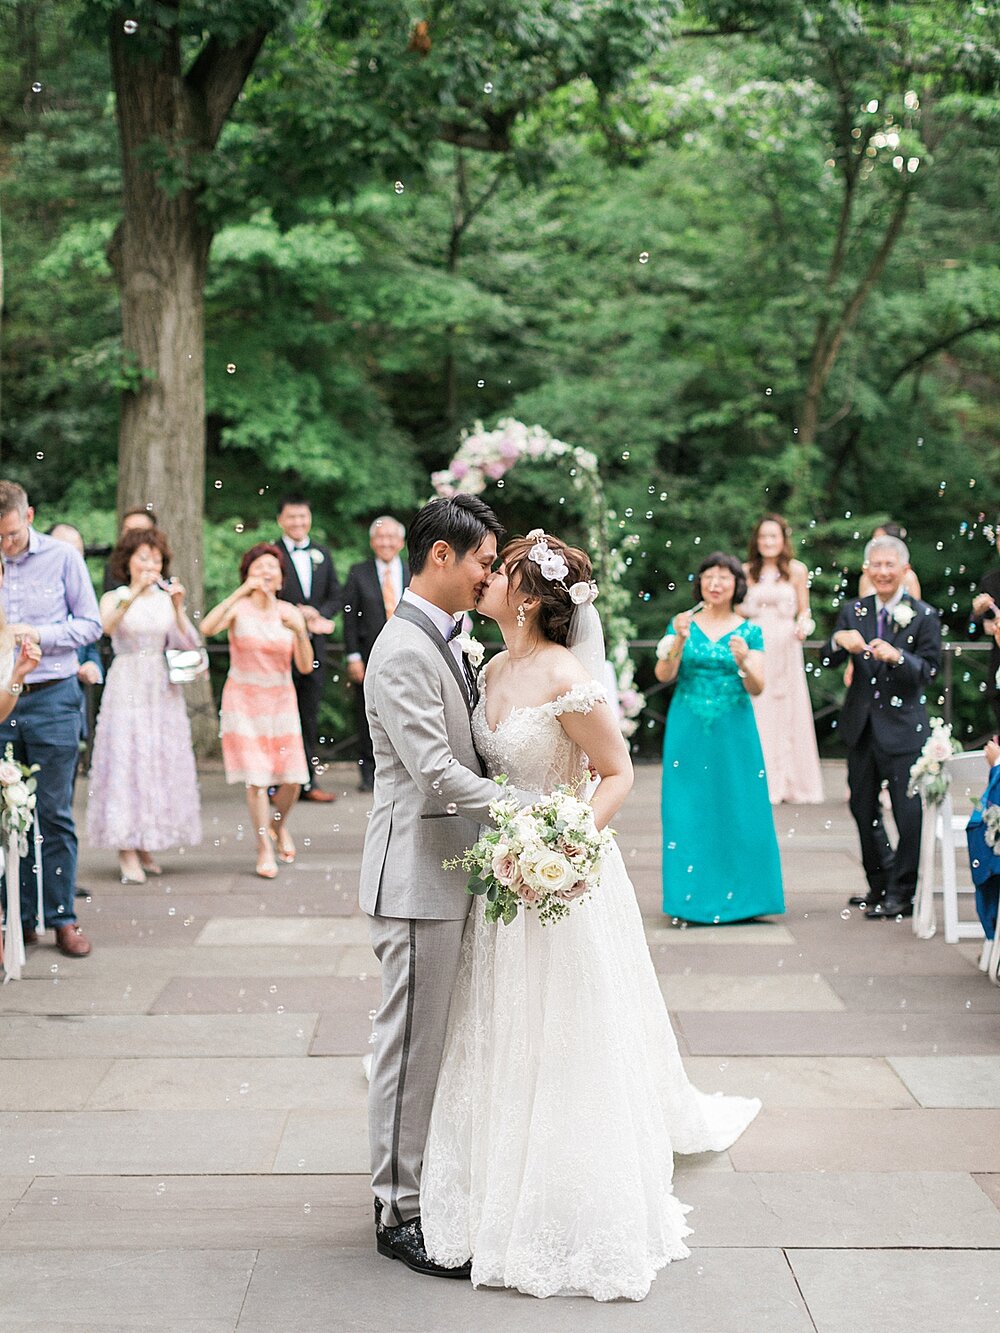 ceremony in Bronx NY | Tri-State area wedding venues photographed by Asher Gardner Photography